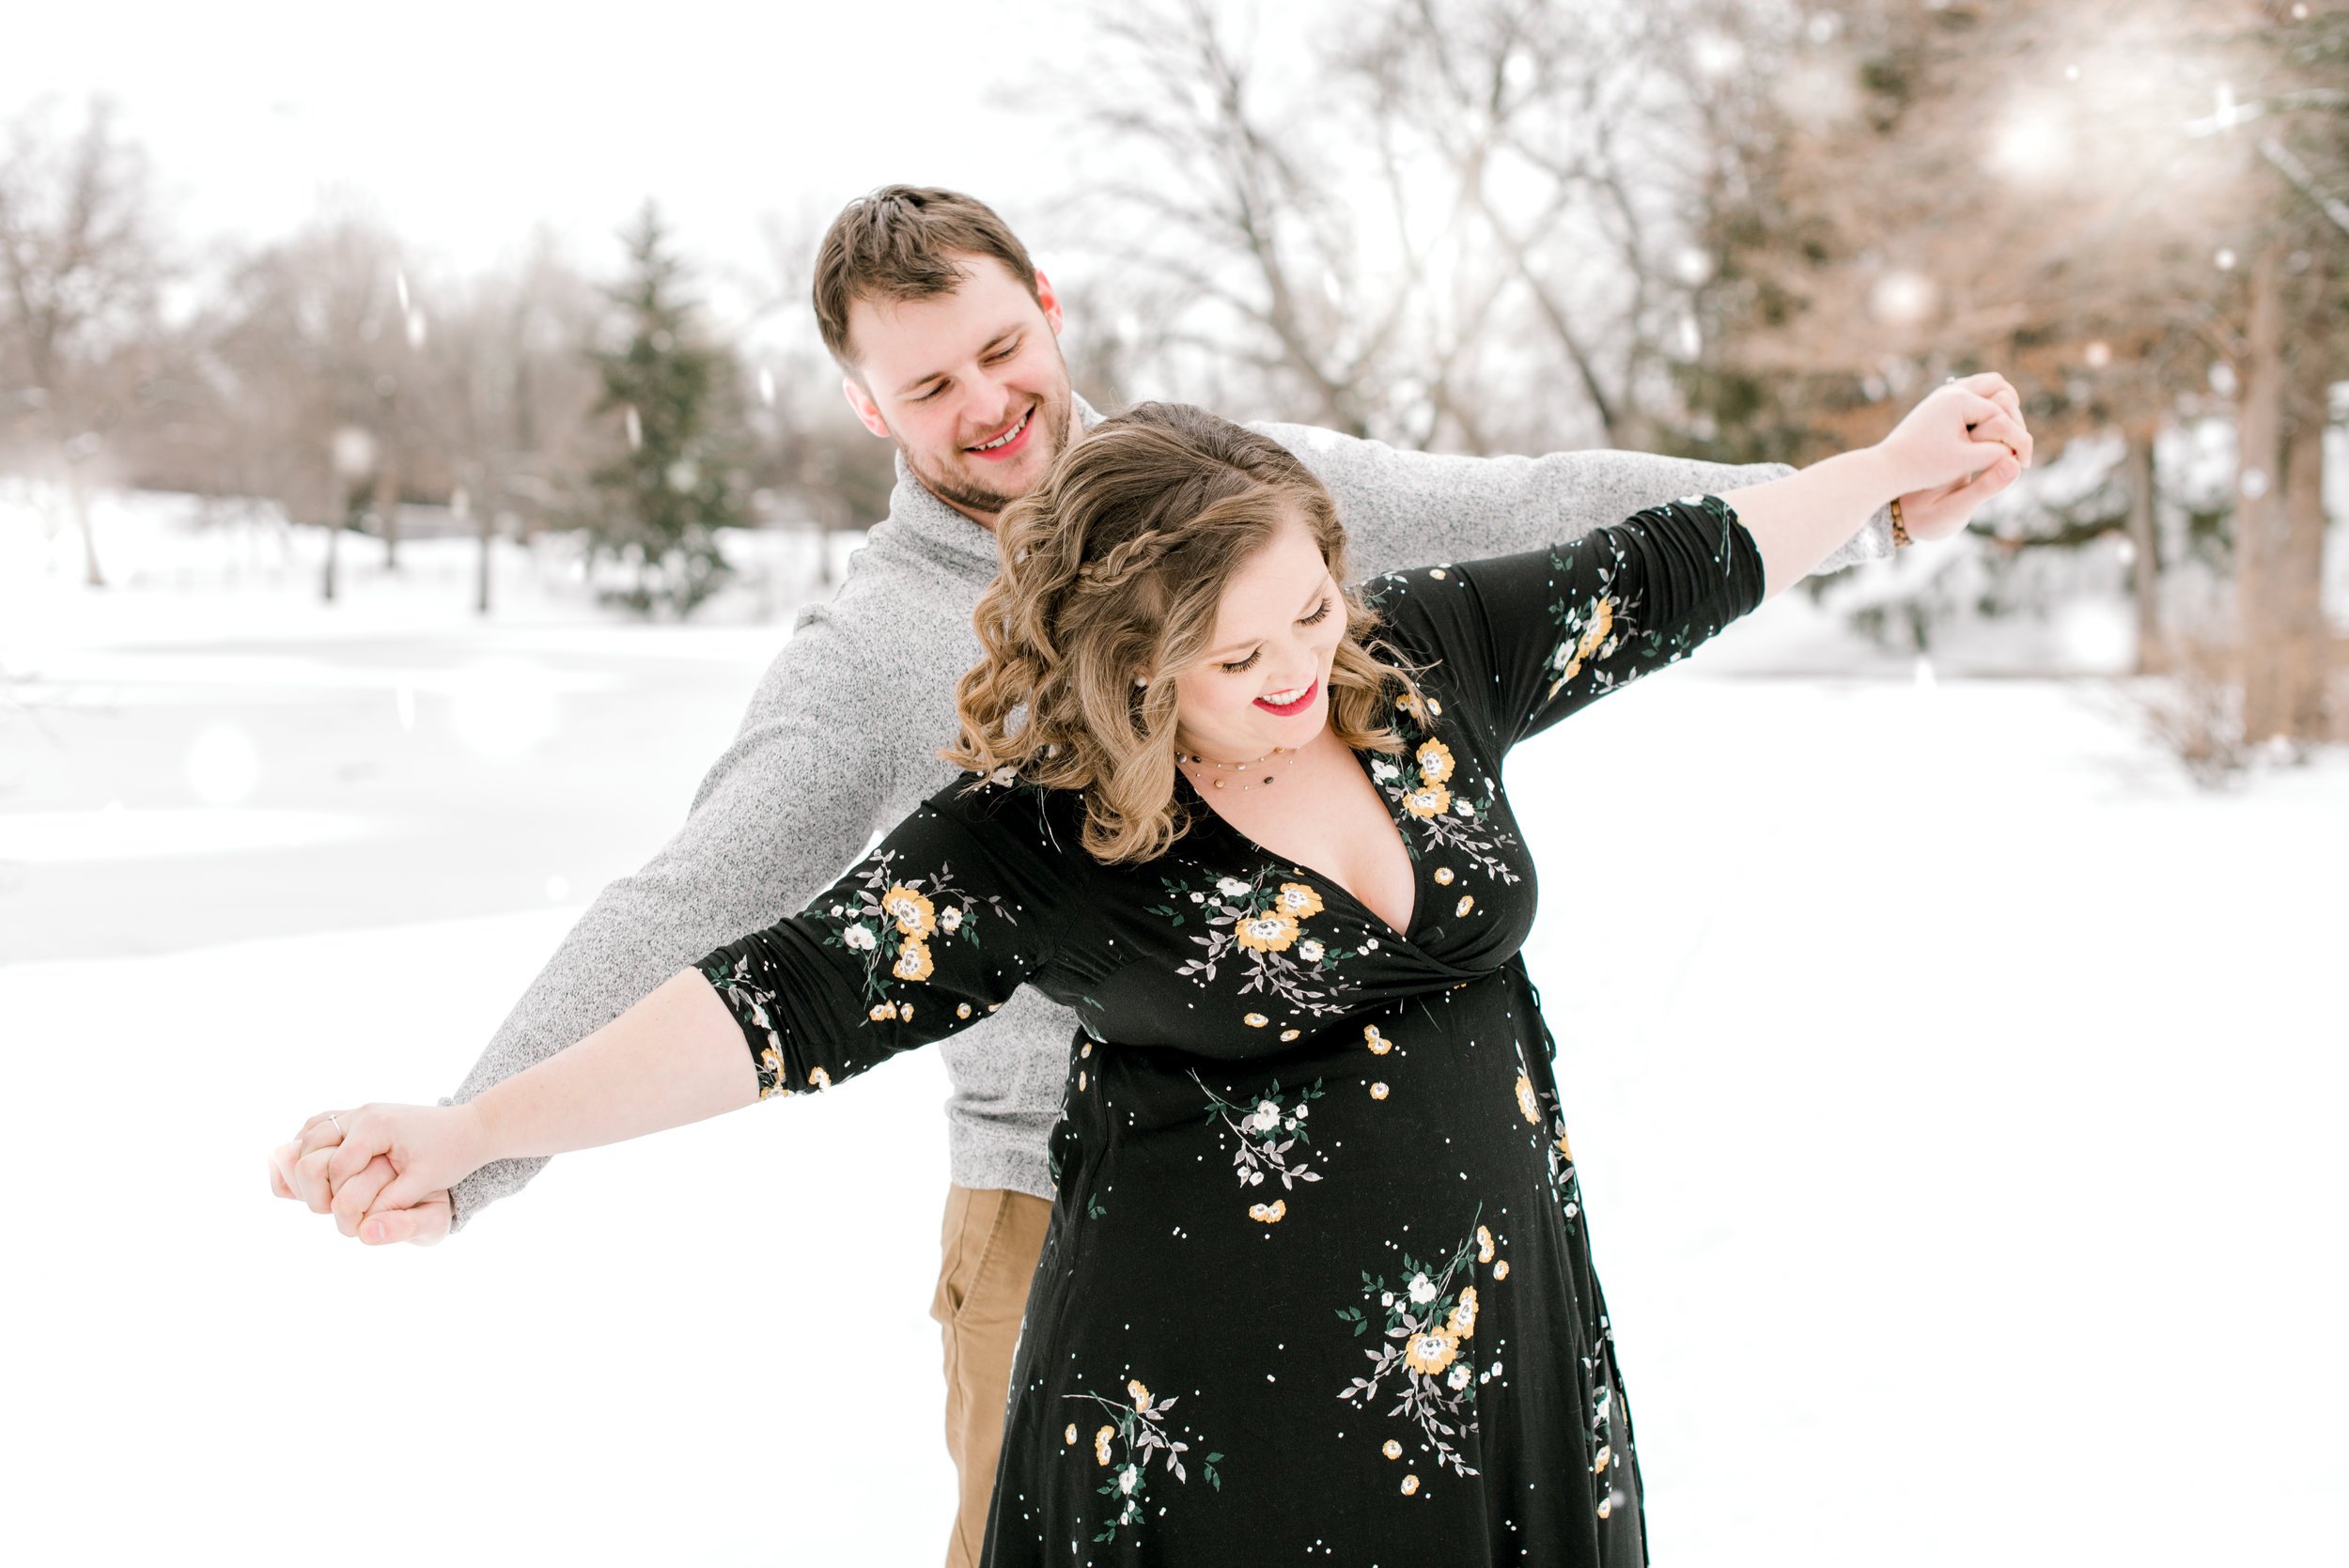 1march2019-roger-williams-park-snow-engagement-session-8.jpg